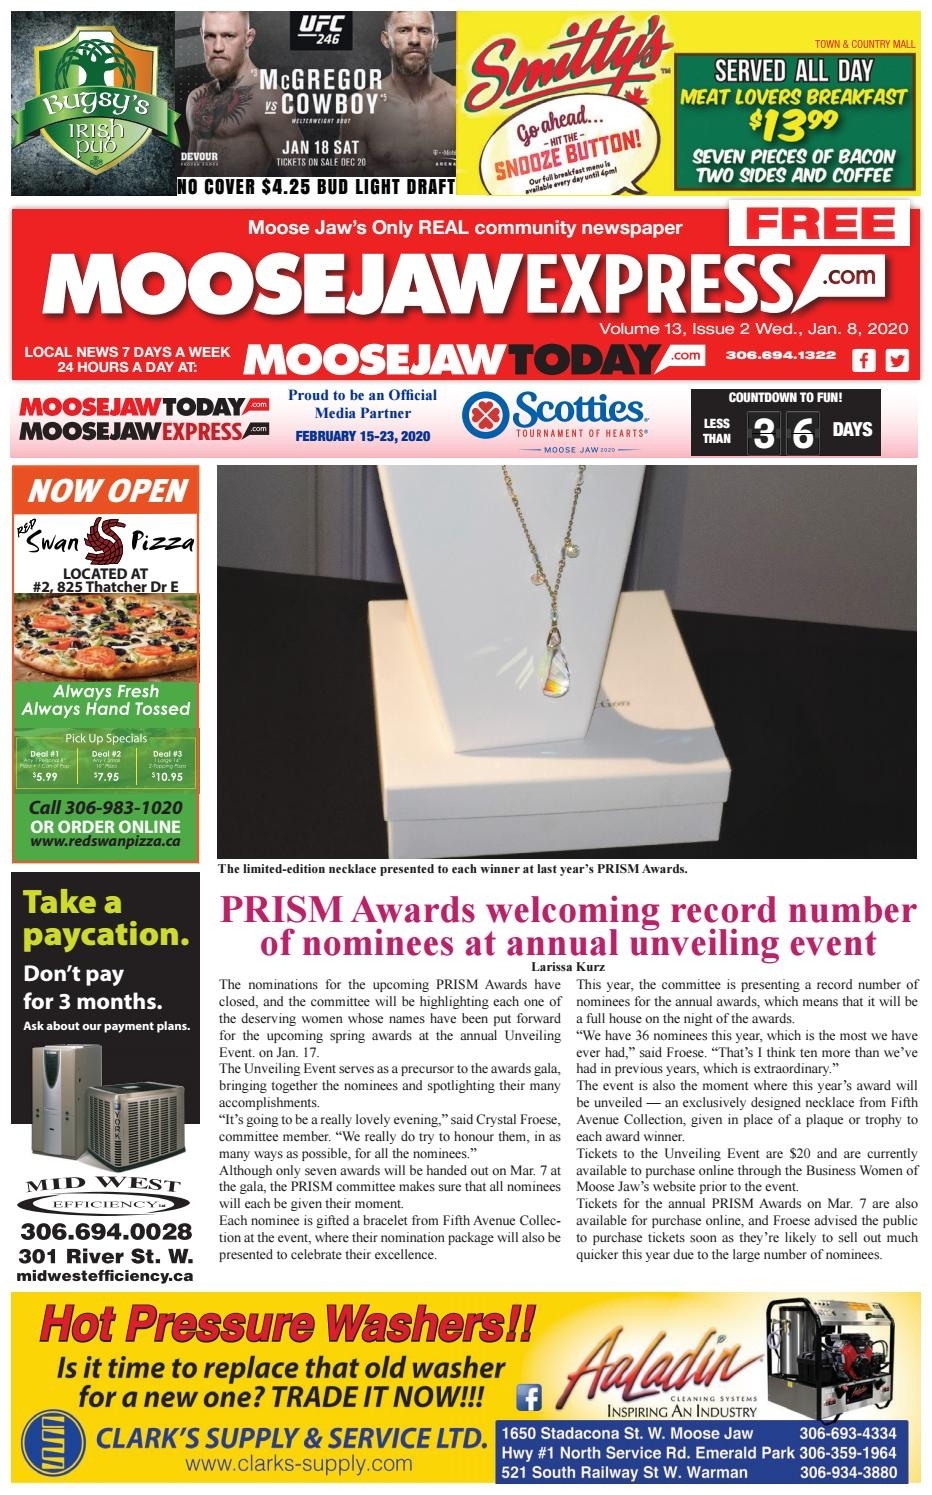 Moose Jaw Express January 8, 2020 By Moose Jaw Express - Issuu Perky Tear Off Countdown 200 Days